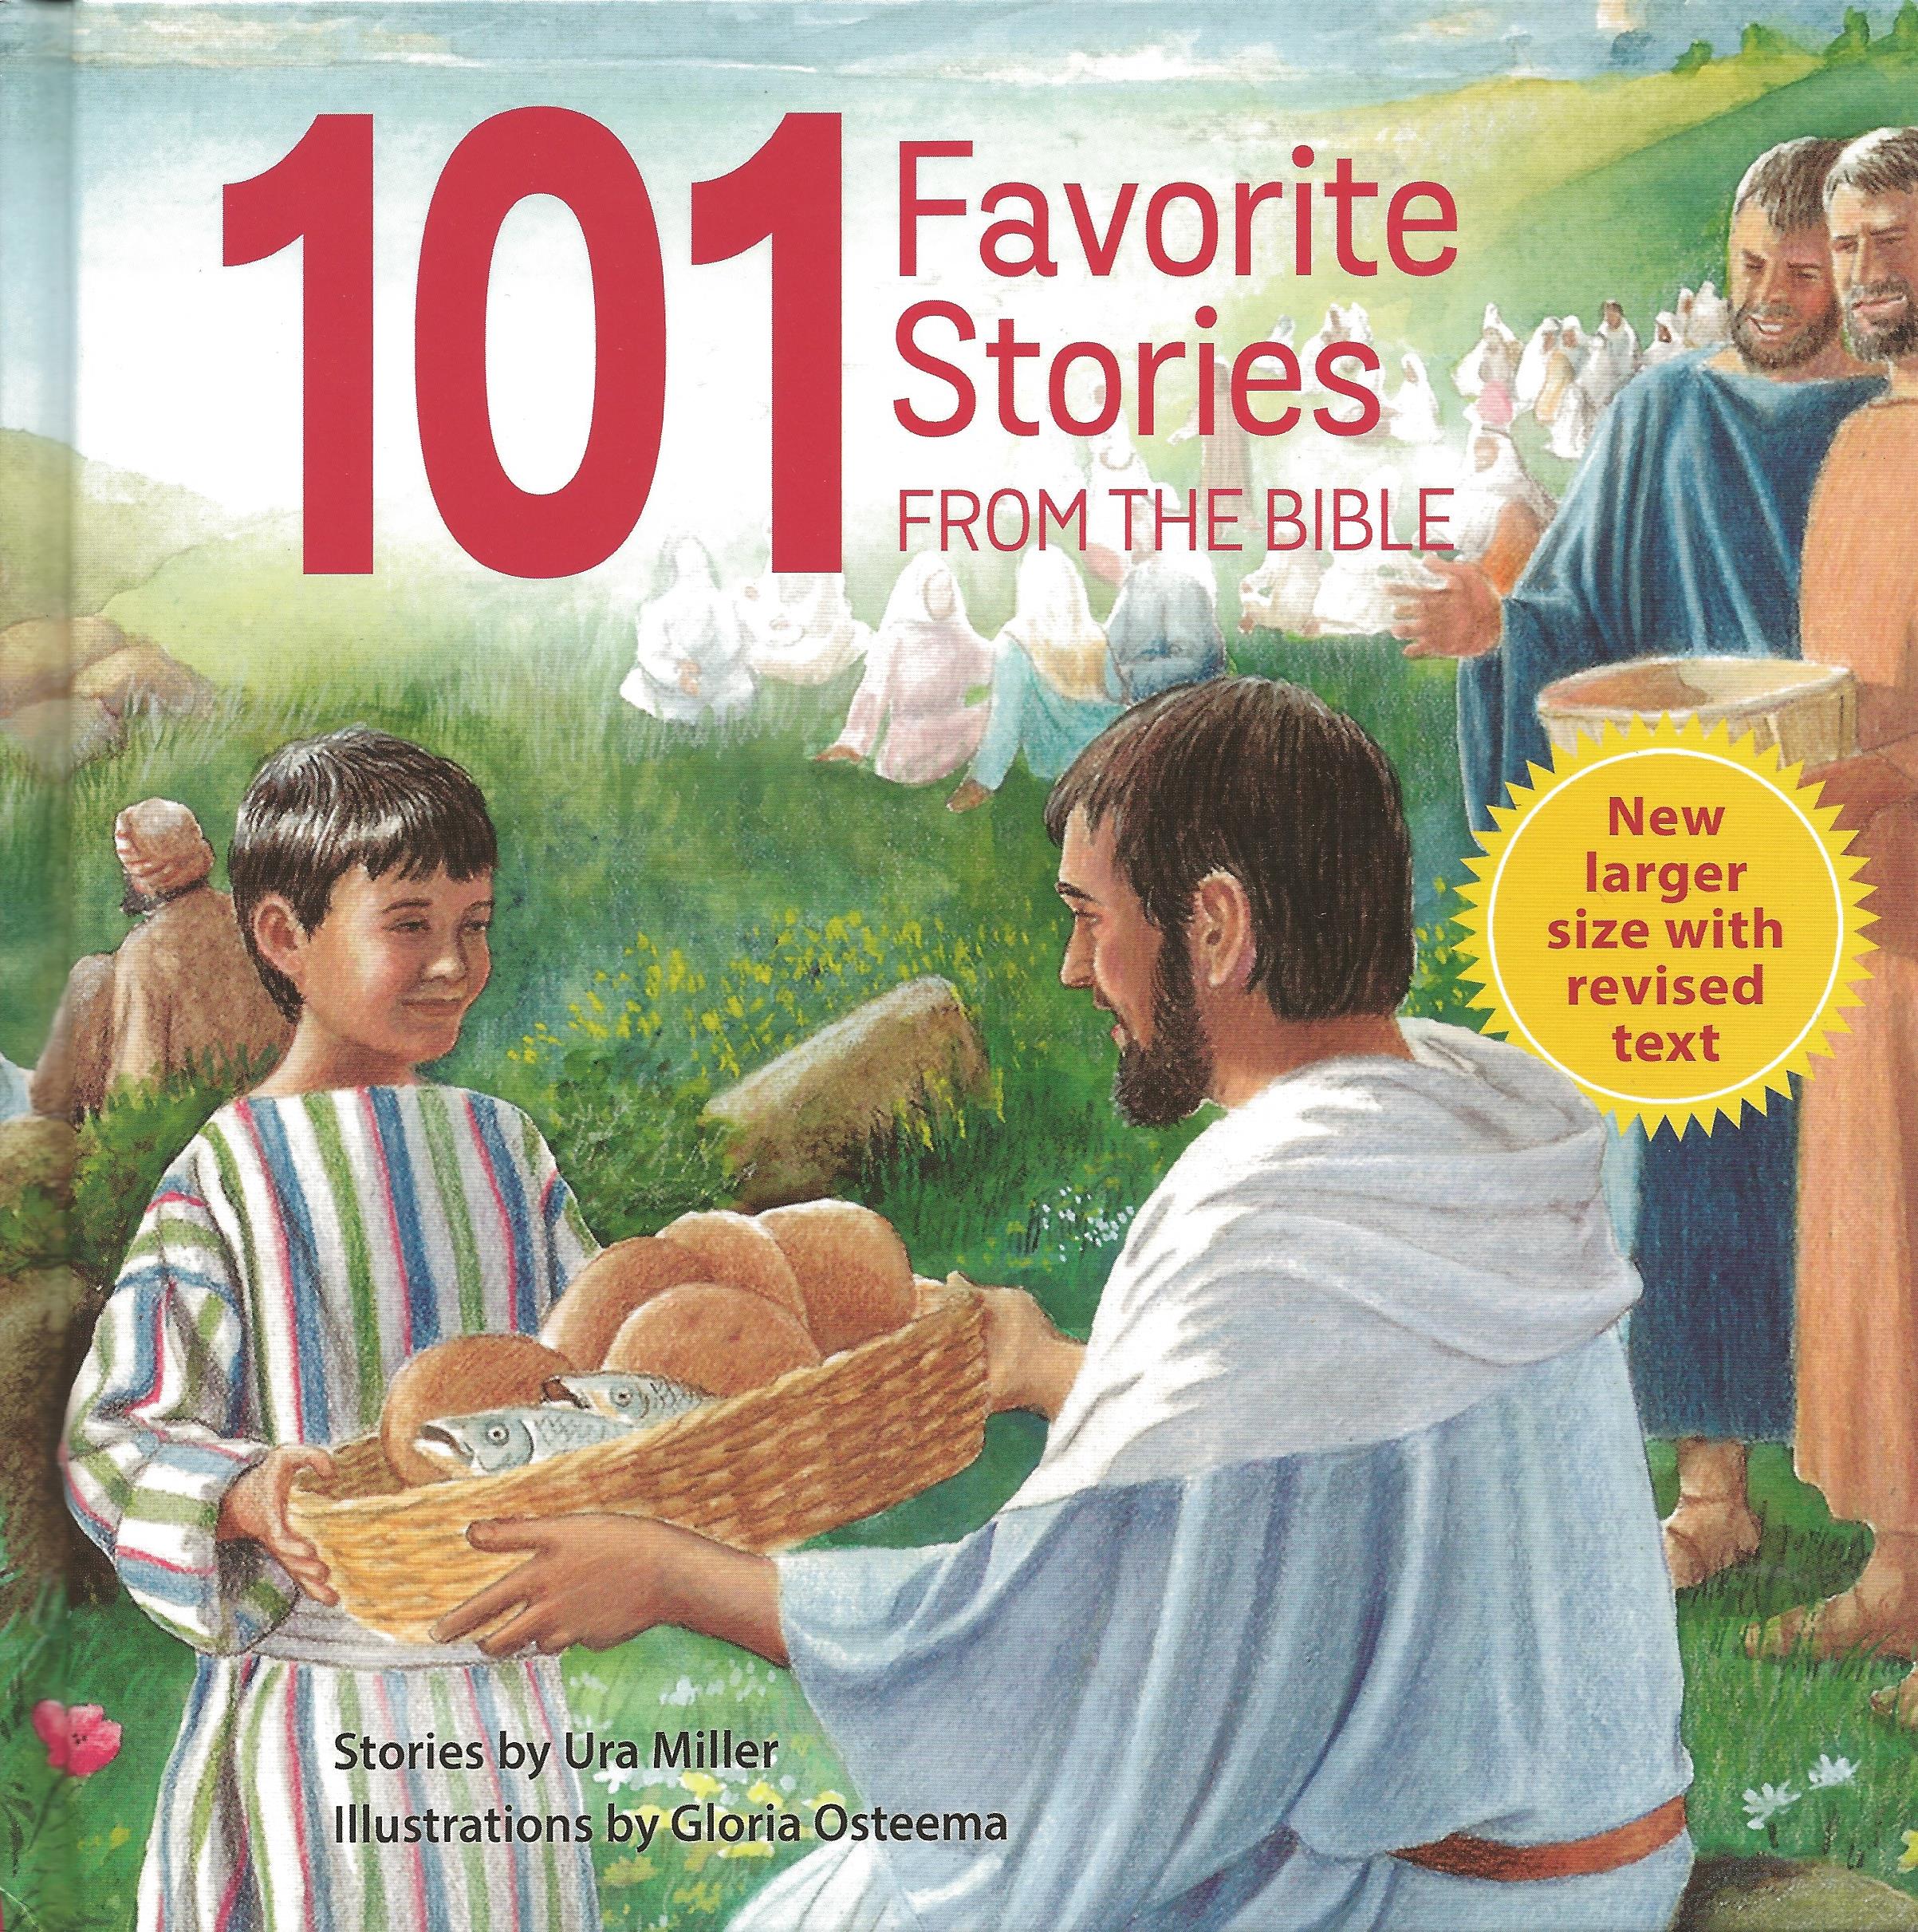 101 FAVORITE STORIES FROM THE BIBLE Ura Miller